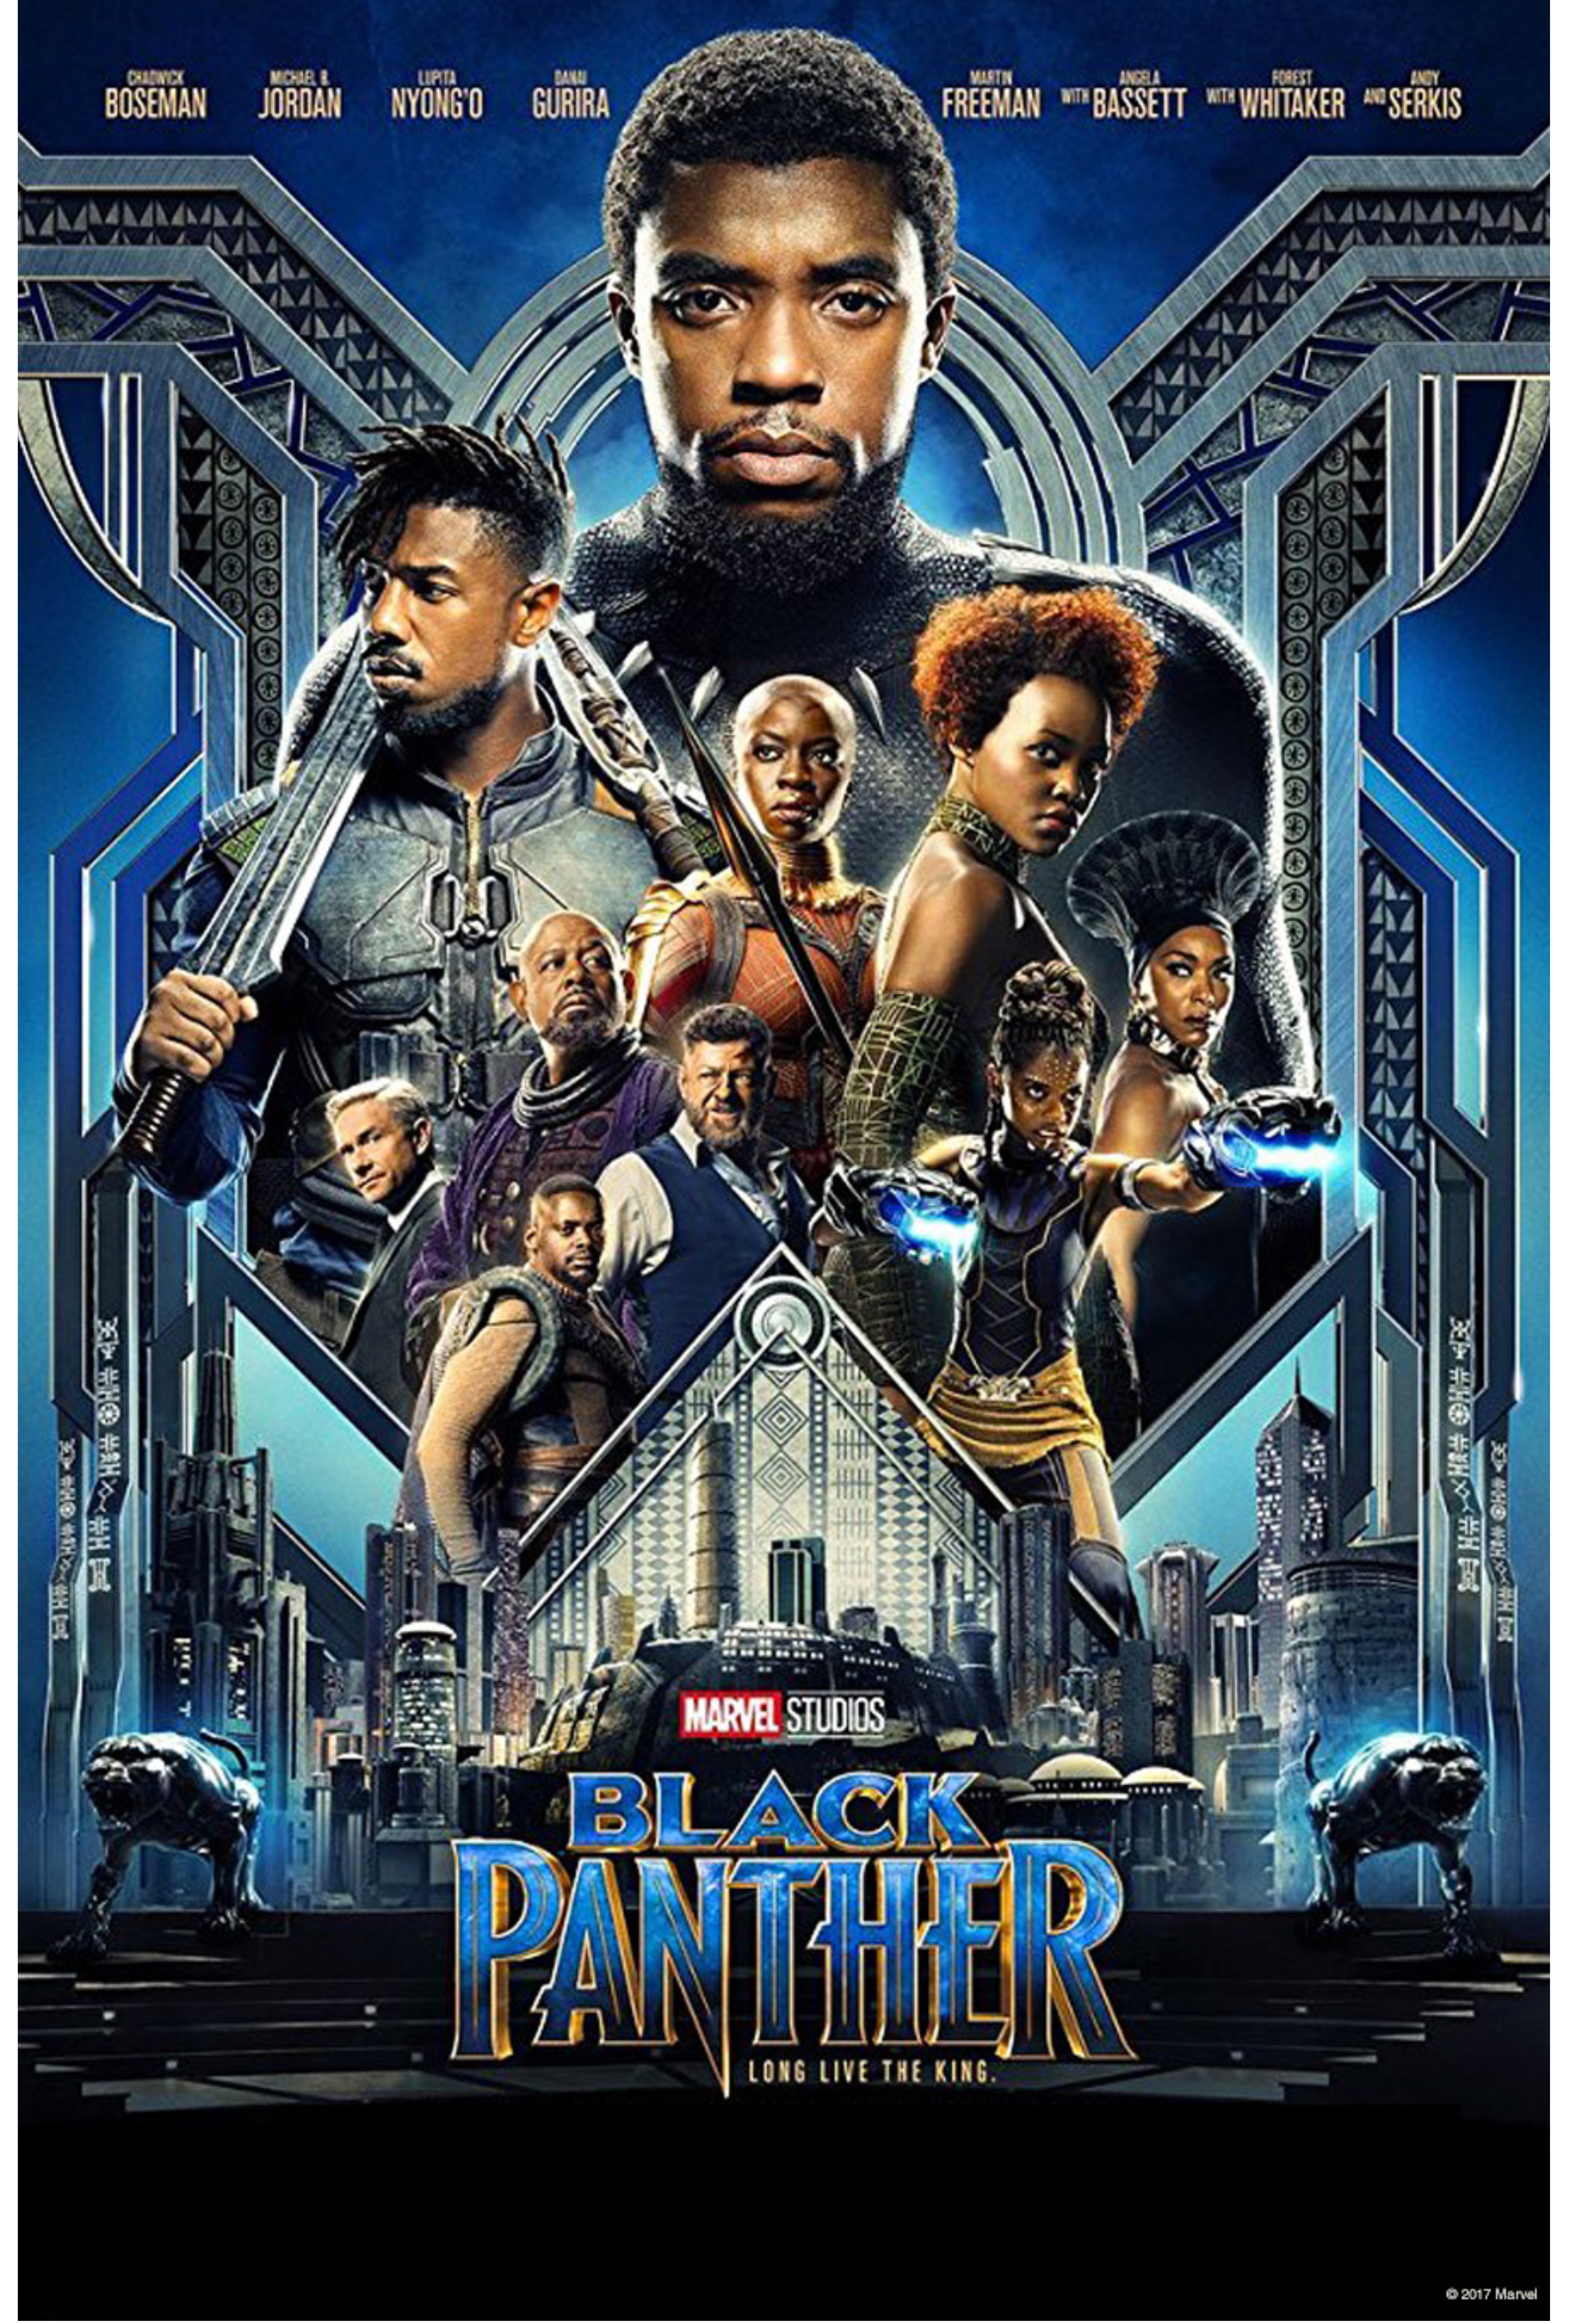 Film poster for Black Panther